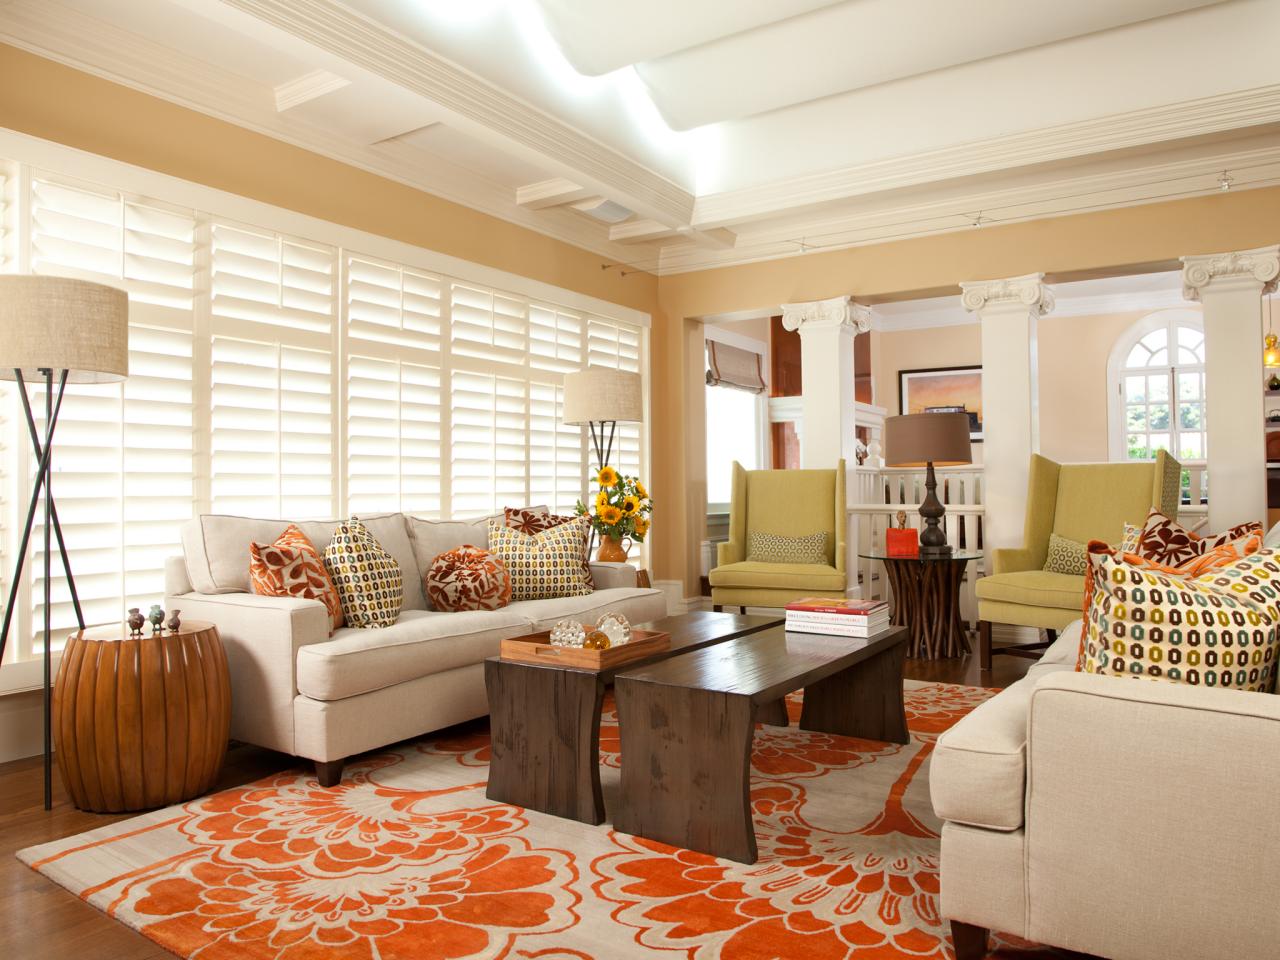 Small Living Room With Plantation Shutters